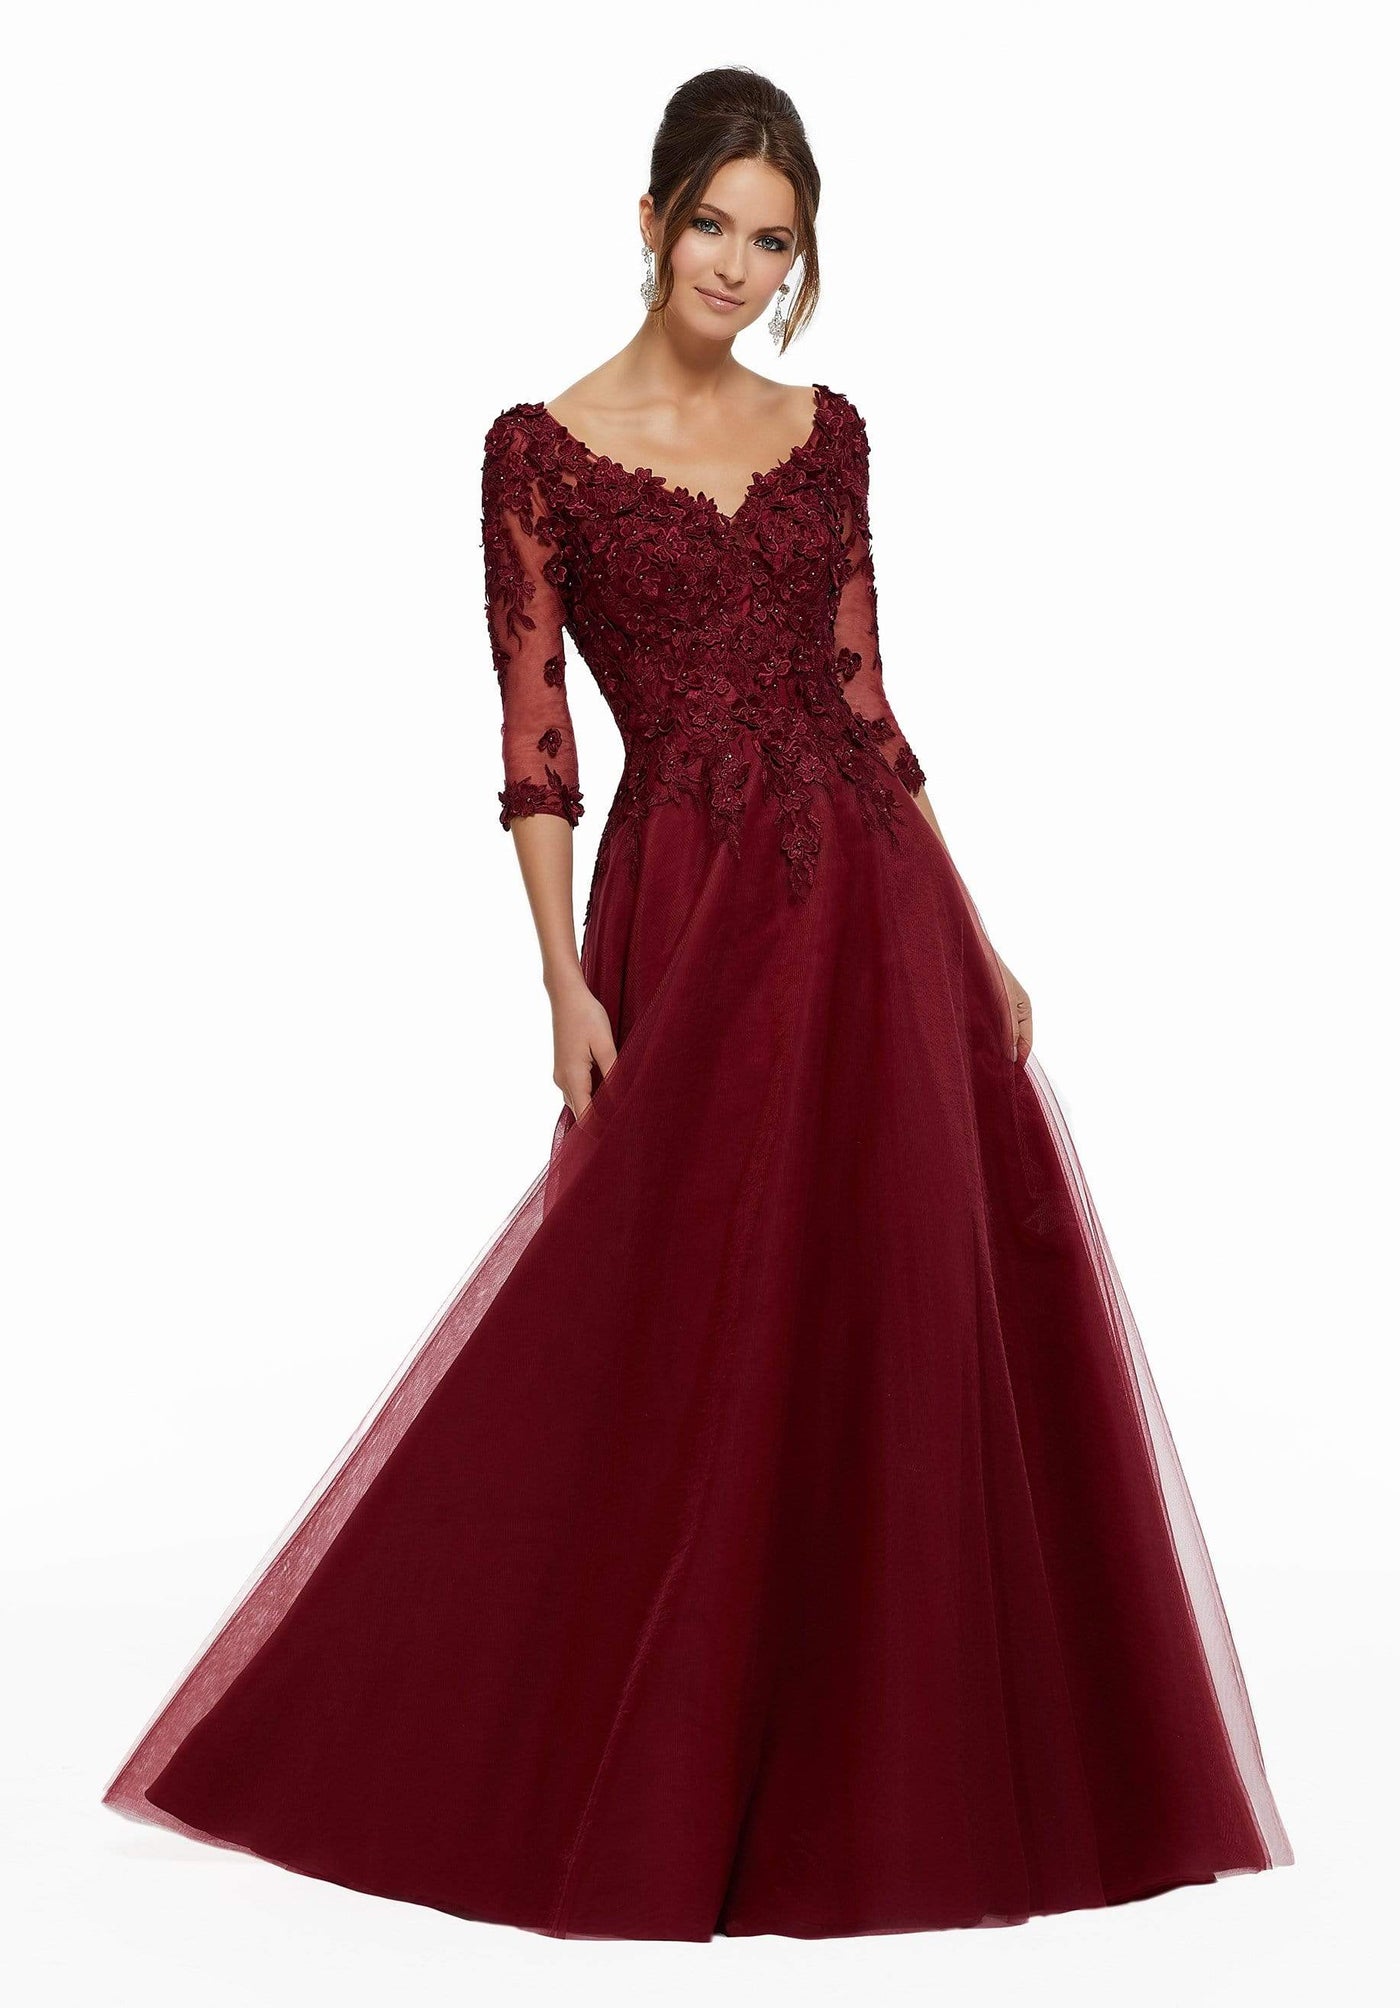 MGNY By Mori Lee - 72031 Floral Embroidered Tulle A-line Gown Mother of the Bride Dresses 0 / Wine